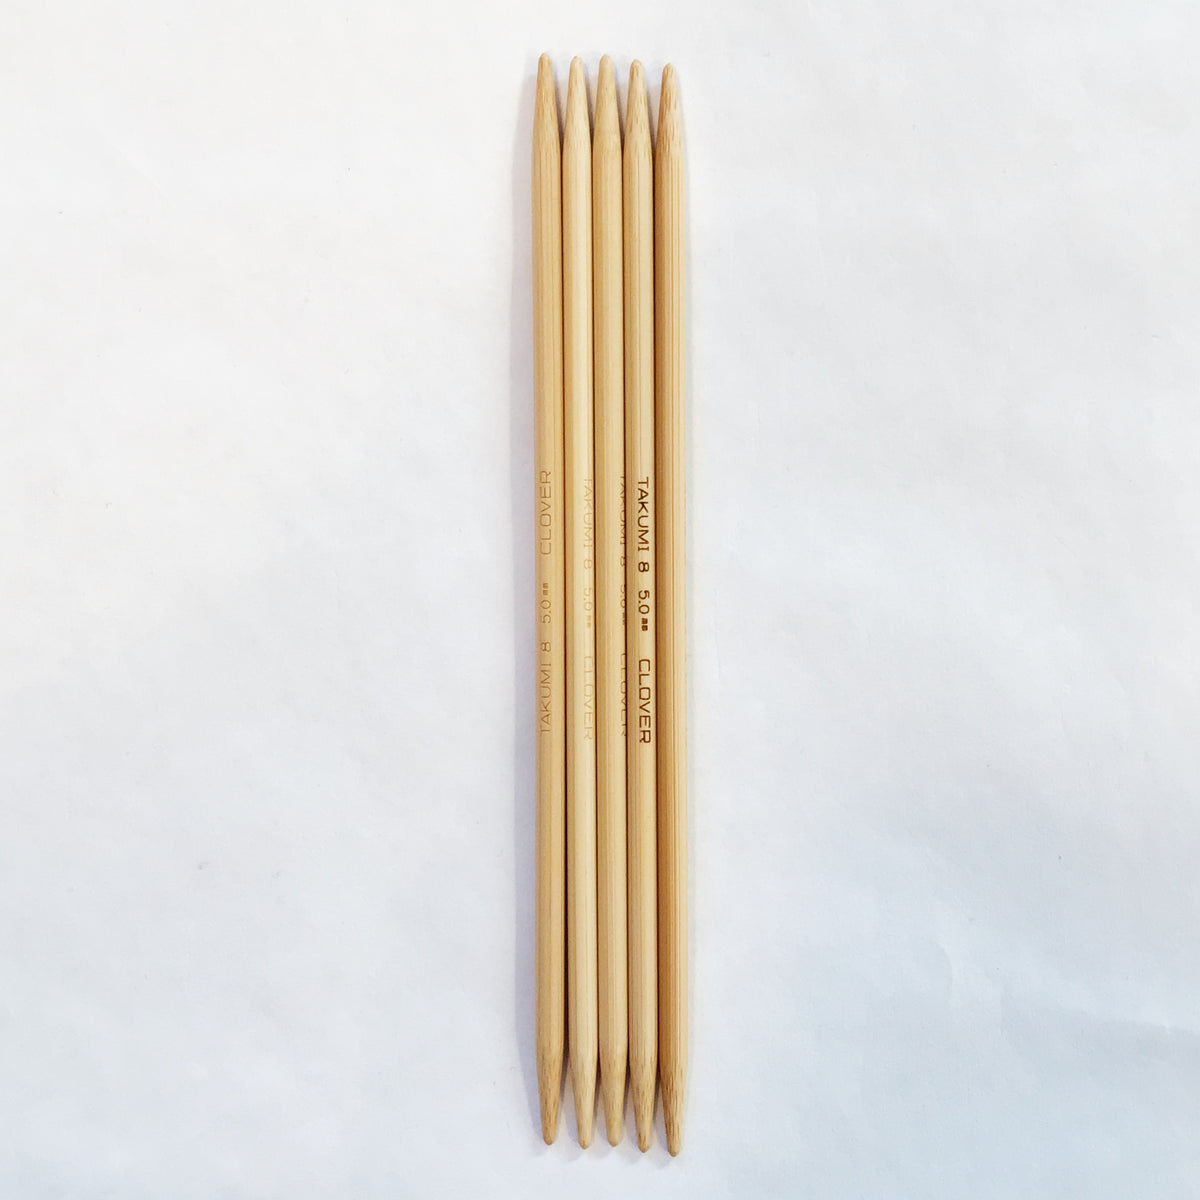 Takumi 7 Bamboo Double Pointed Knitting Needles (DPN) – gather here online